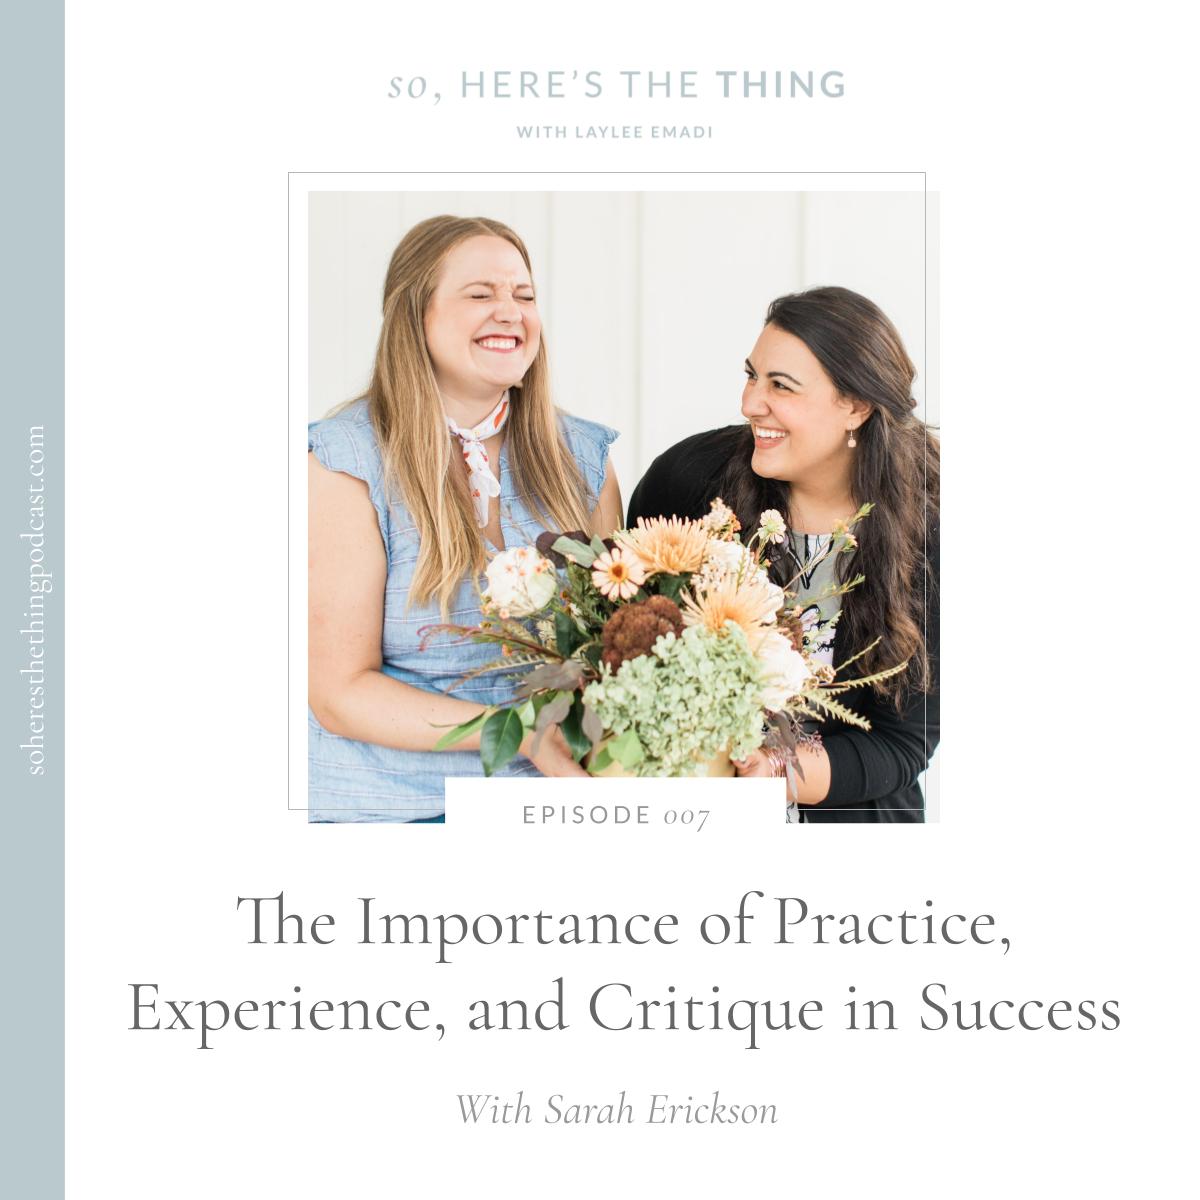 The Importance of Practice, Experience, and Critique in Success with Sarah Erickson